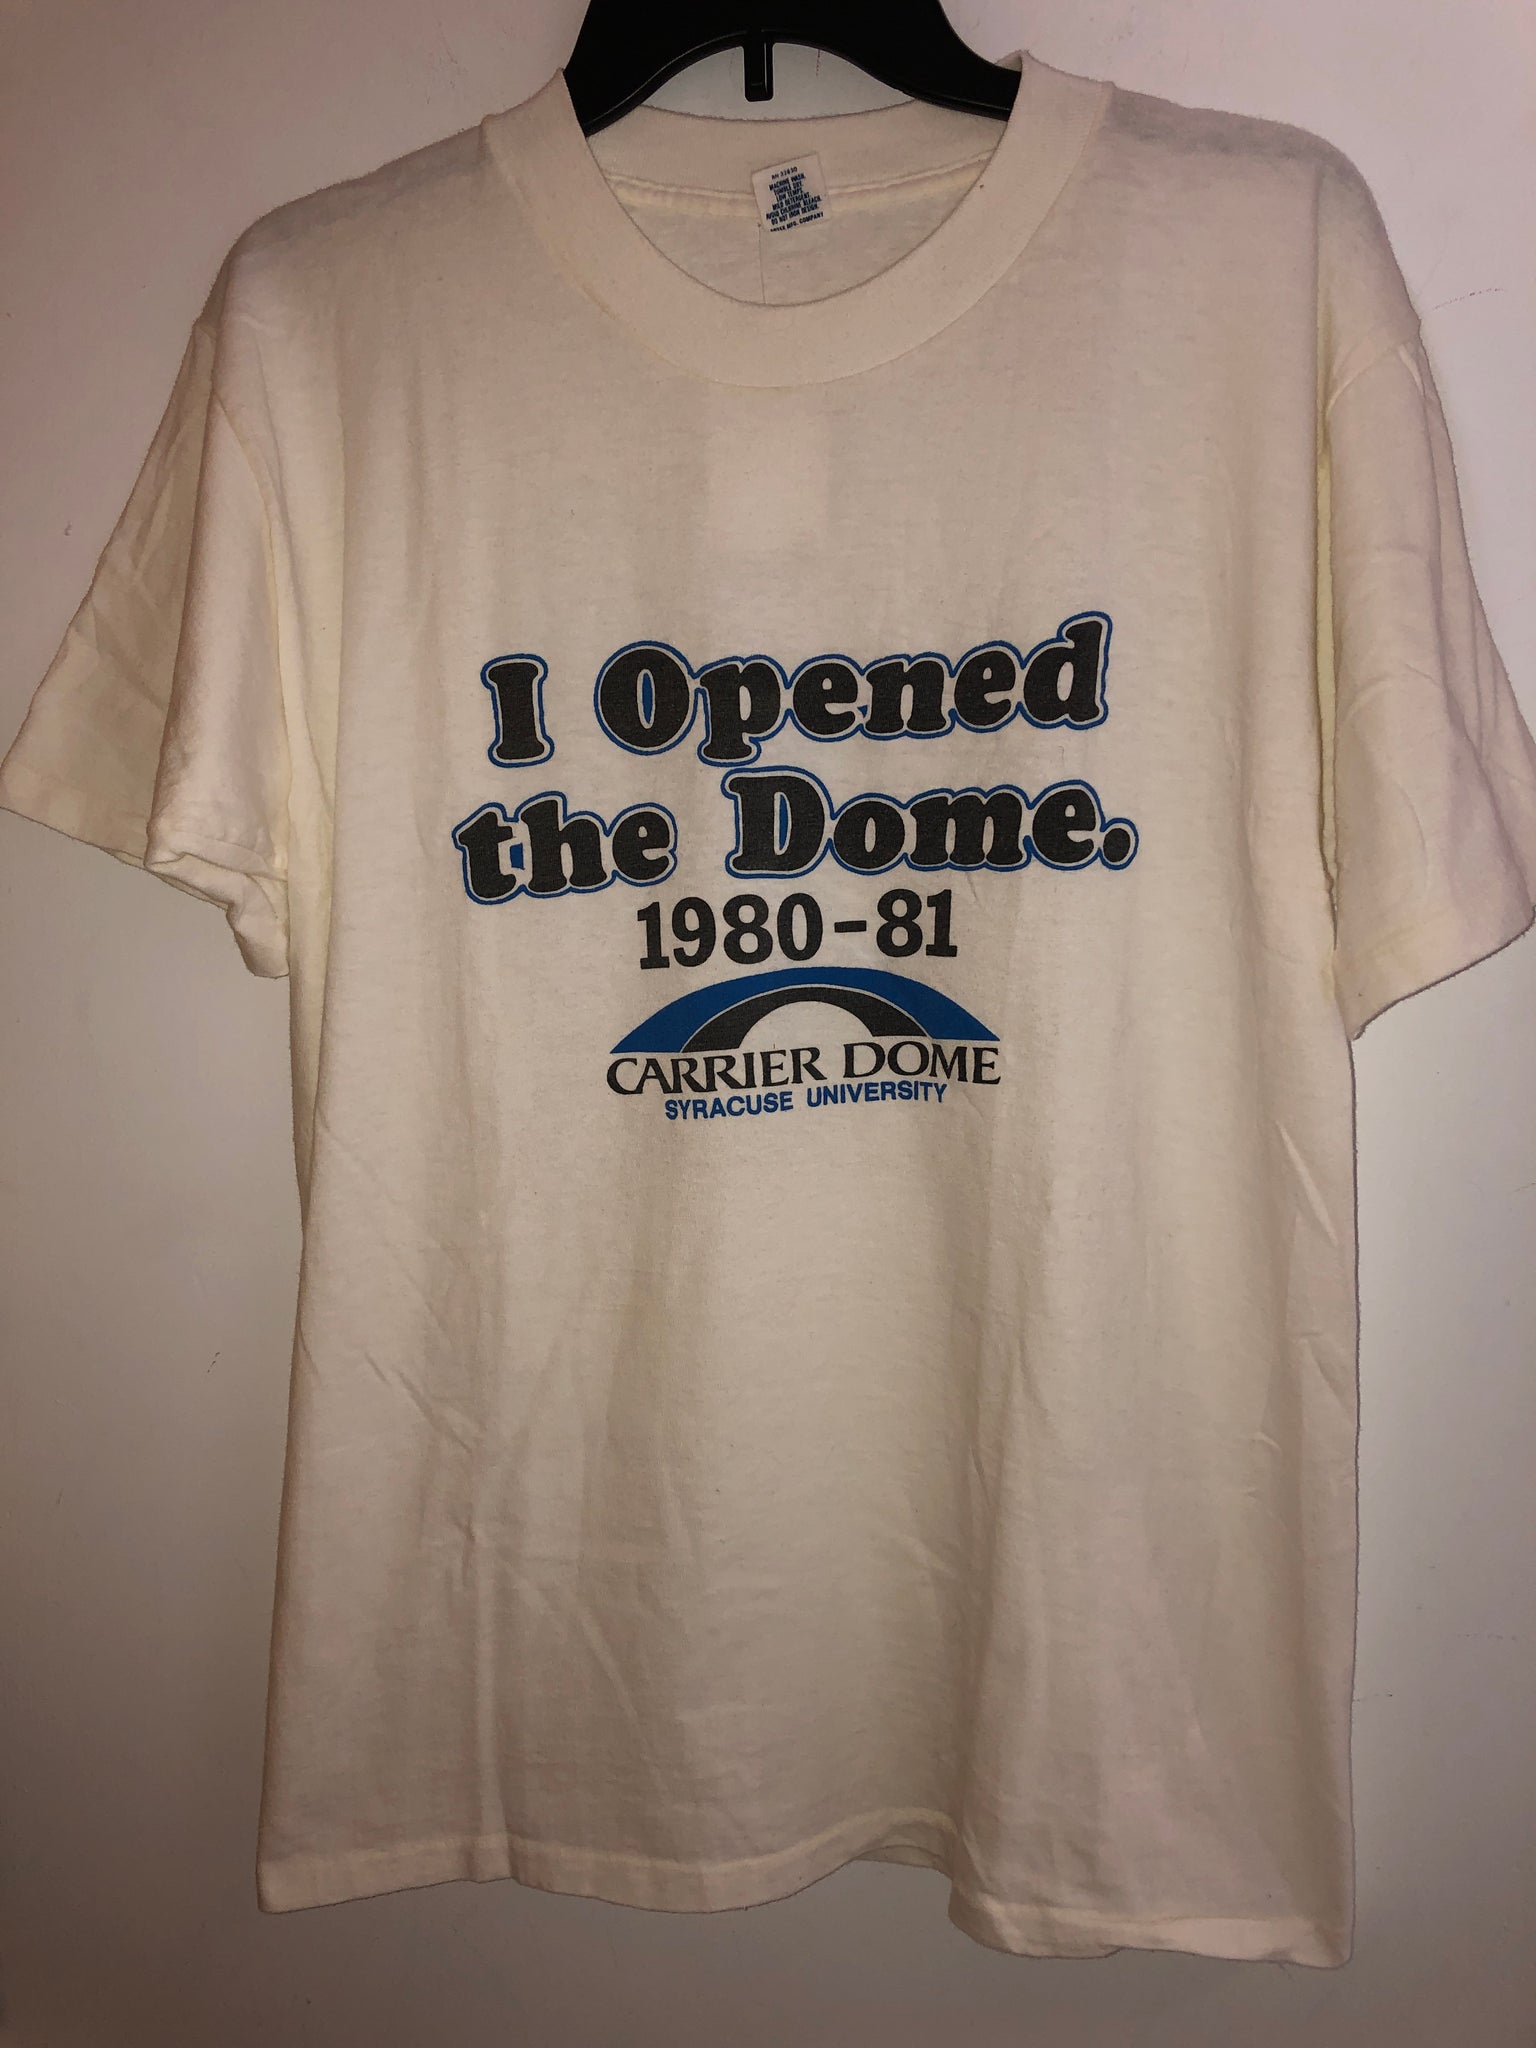 Extremely rare 80's Vintage I opened the Carrier Dome T Shirt fits a Medium Made in USA